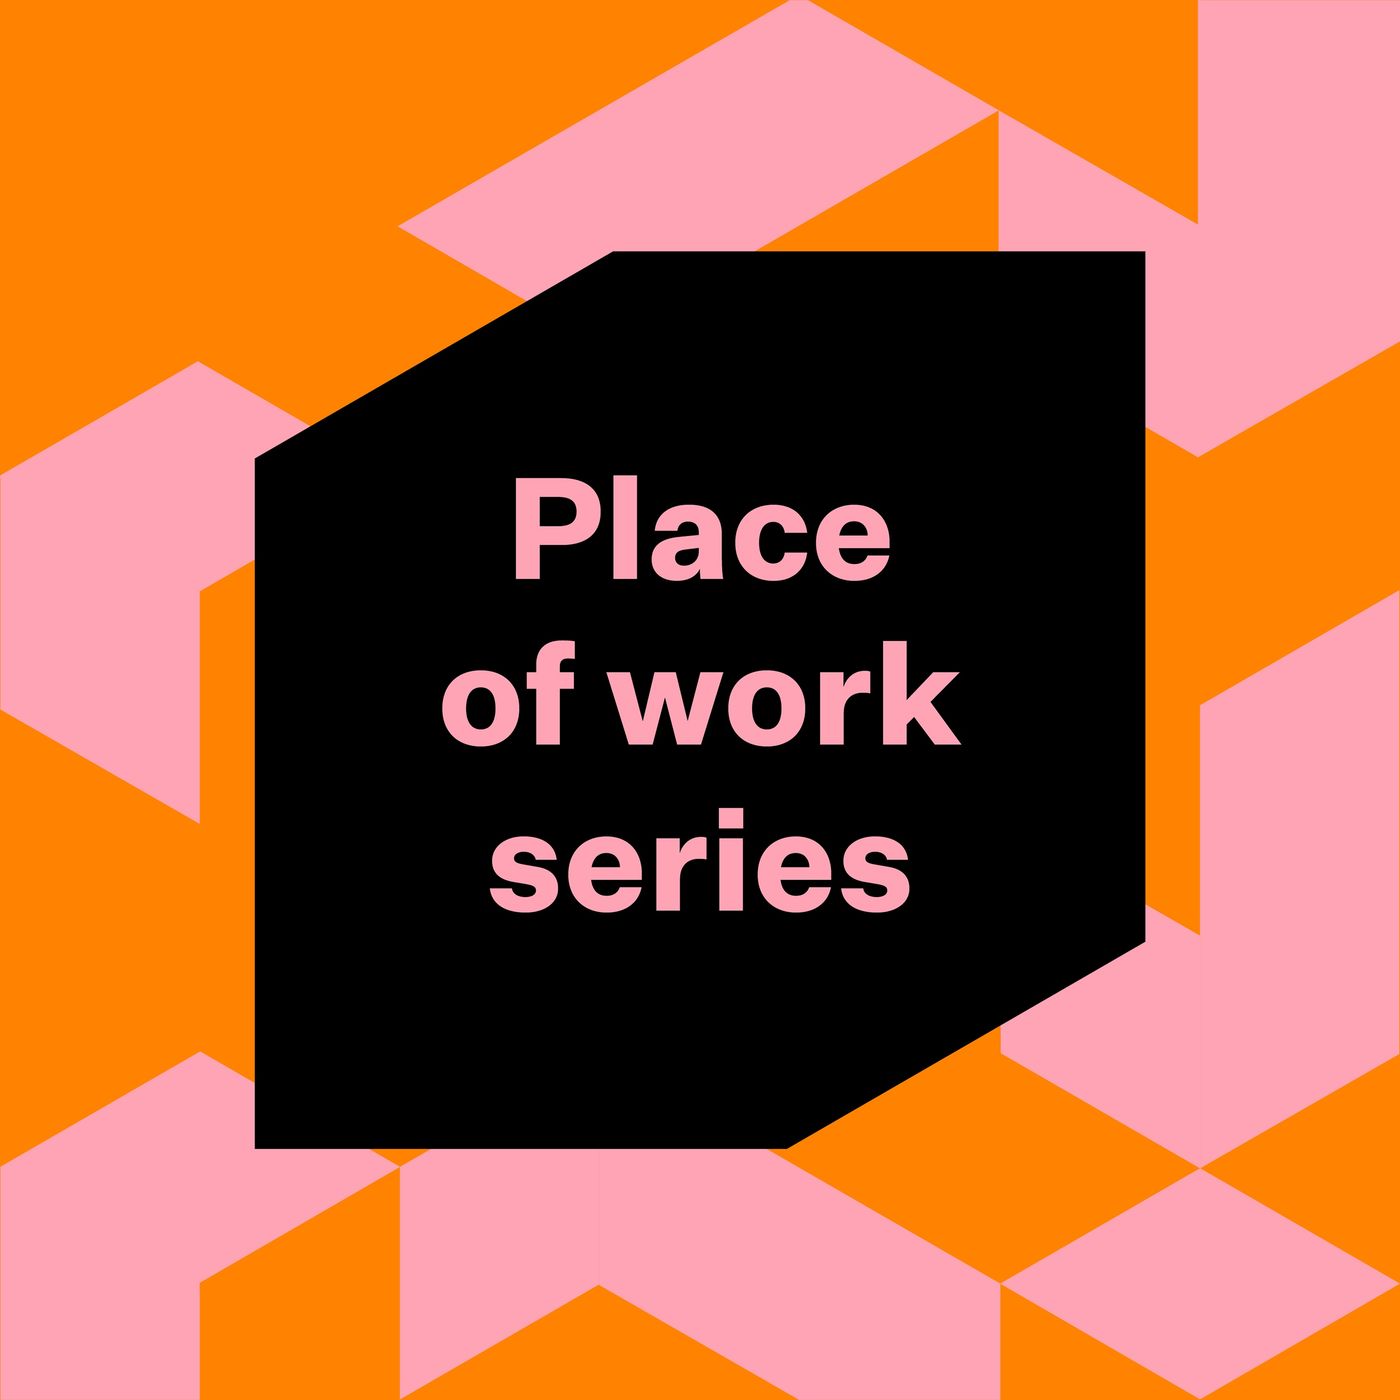 The return to work: employing psychological safety through design